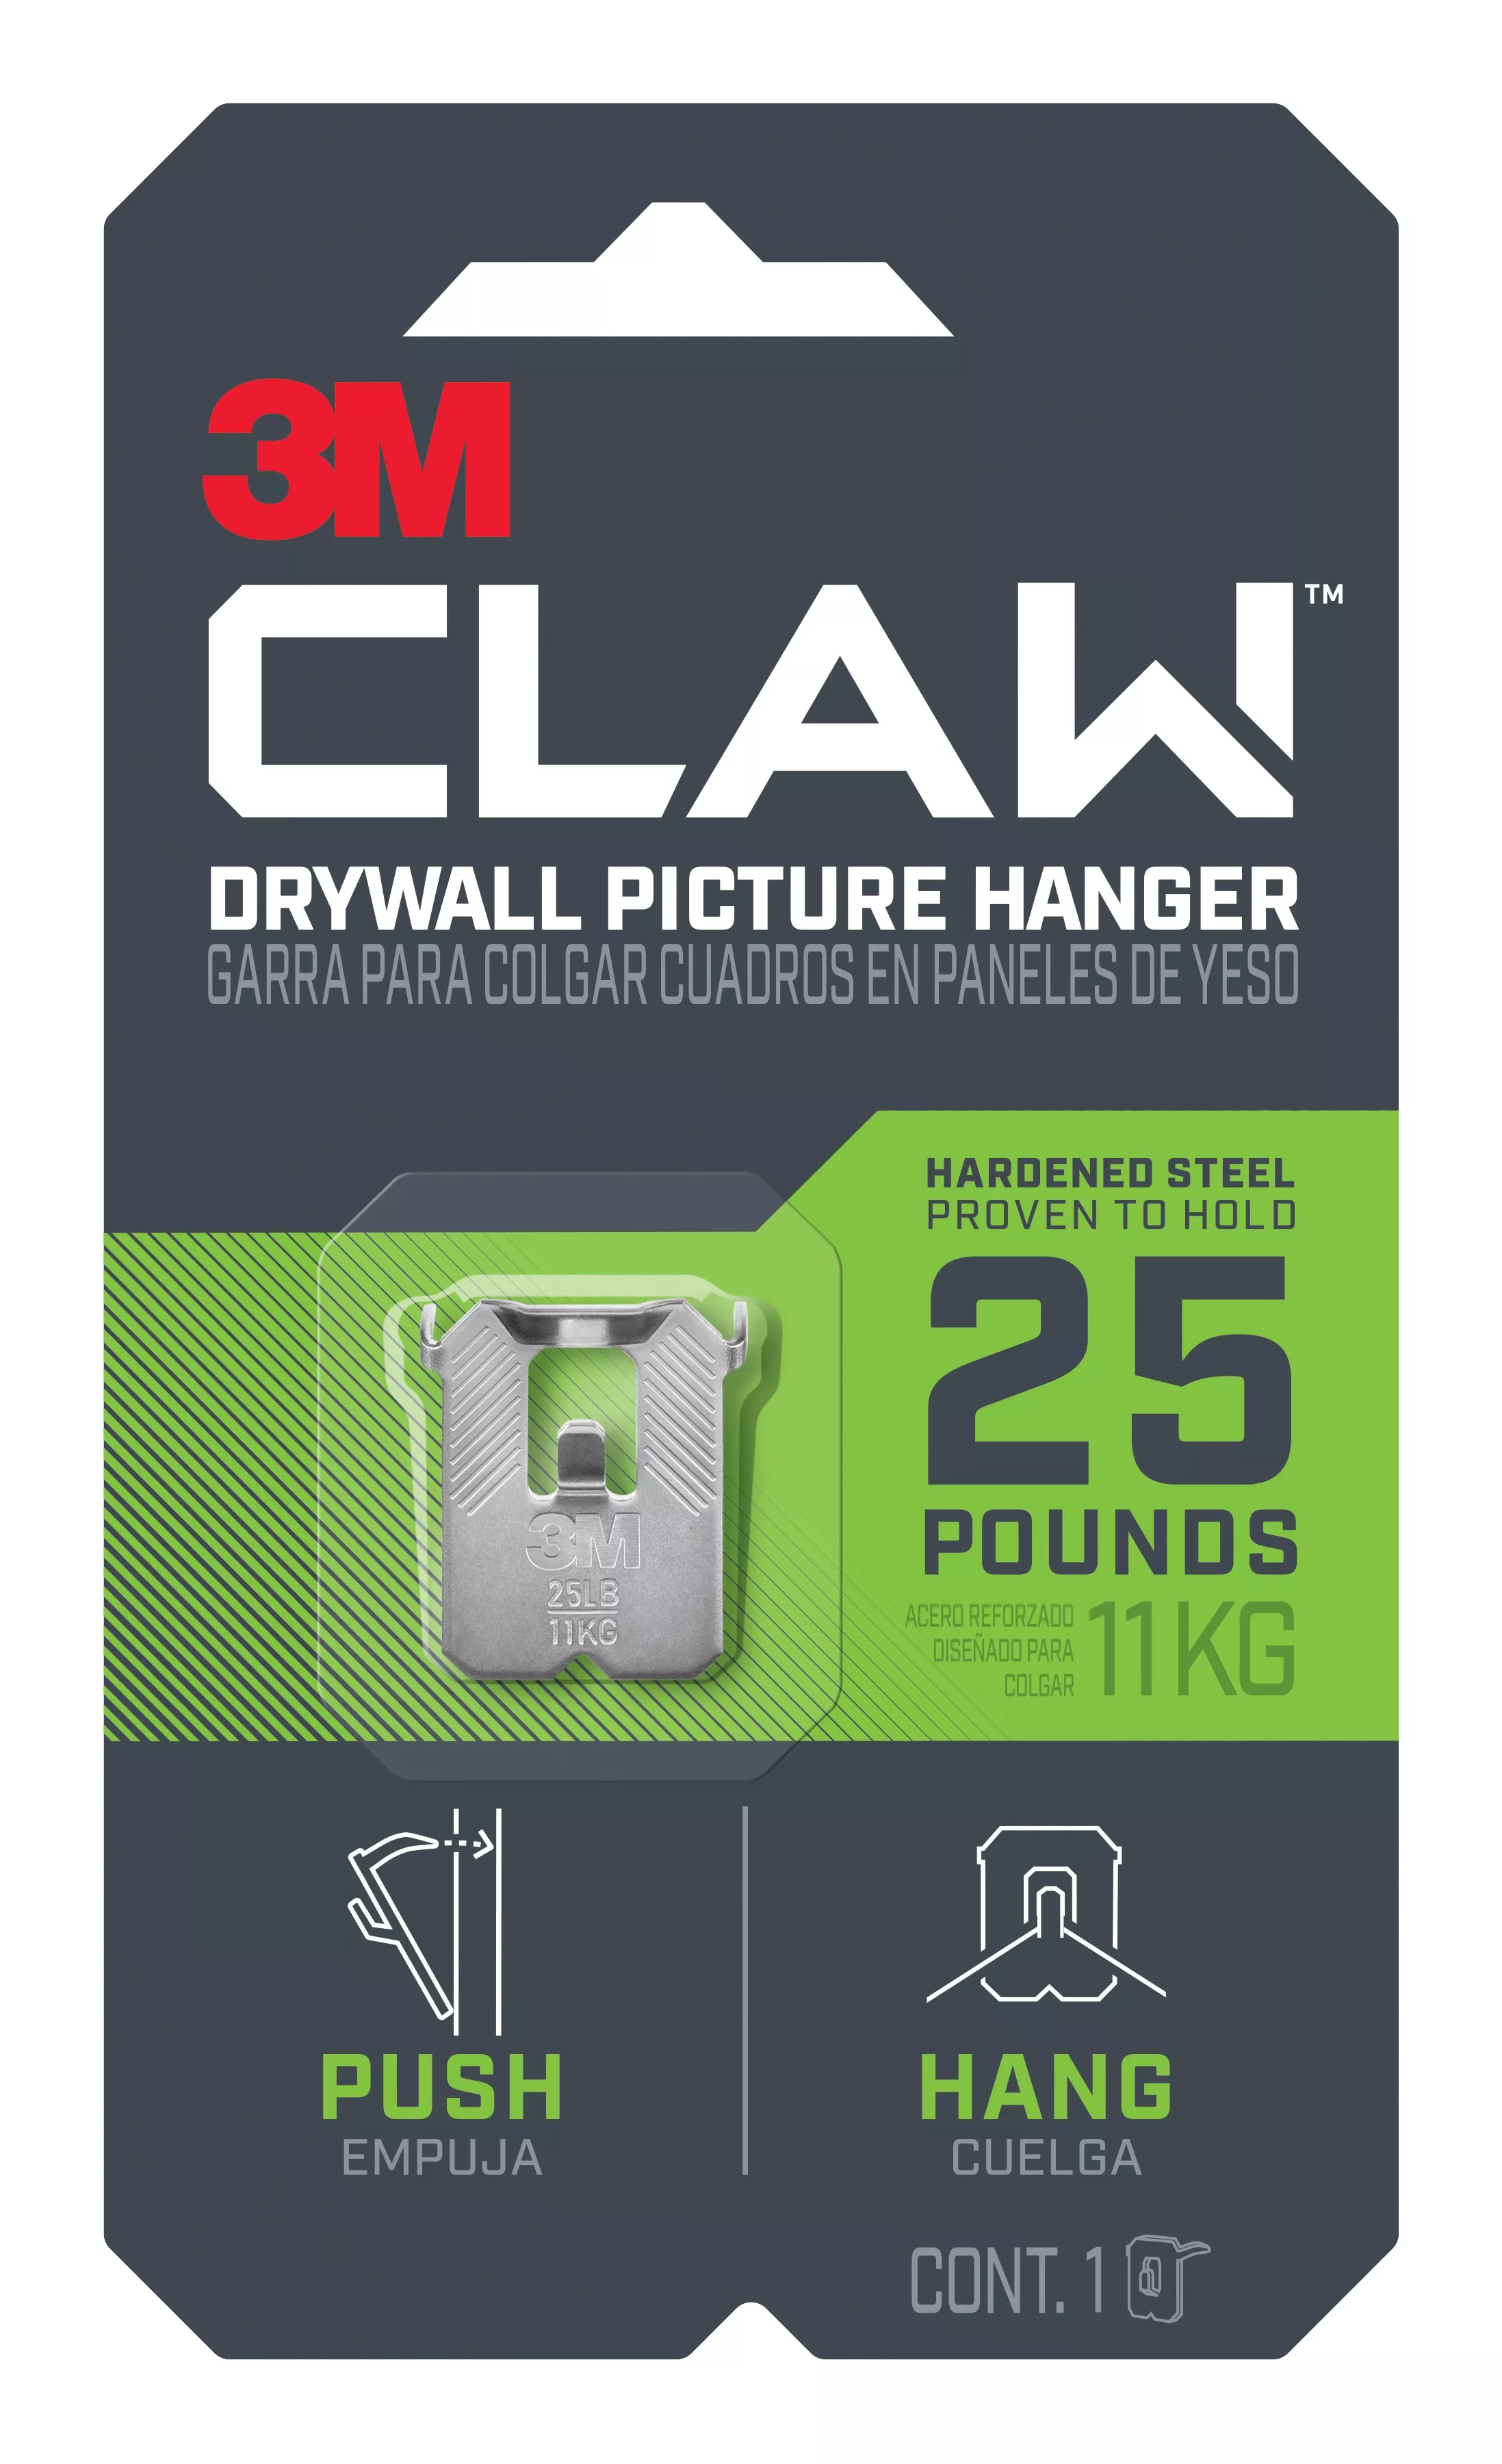 SKU 7100233257 | 3M™ CLAW™ Drywall Picture Hanger 25 lb 3PH25-1ES